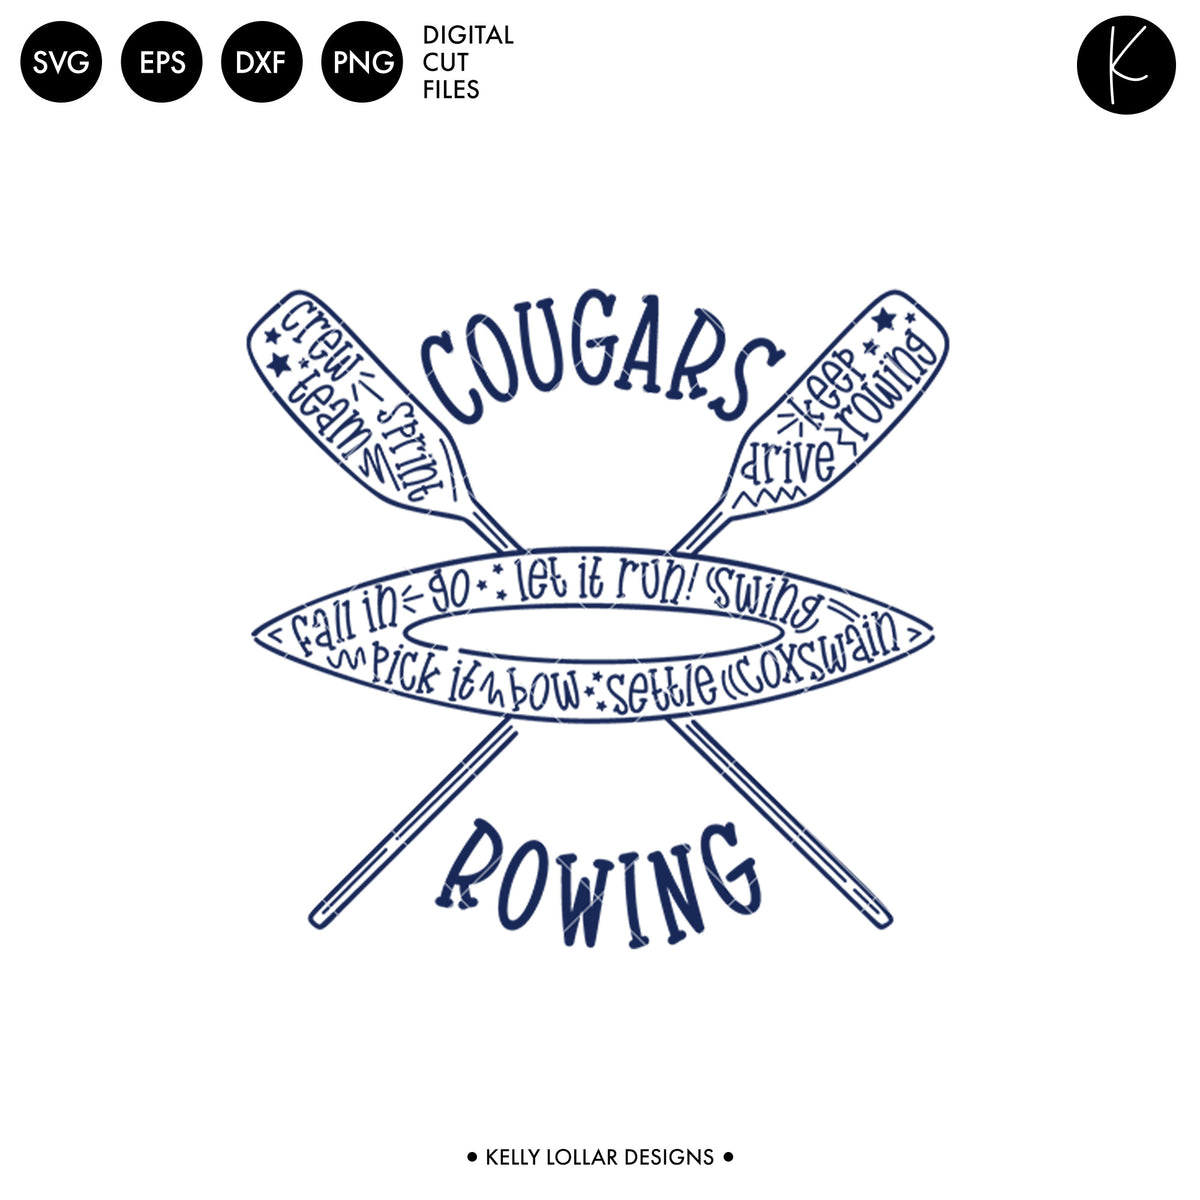 Cougars Rowing Crew Bundle | SVG DXF EPS PNG Cut Files